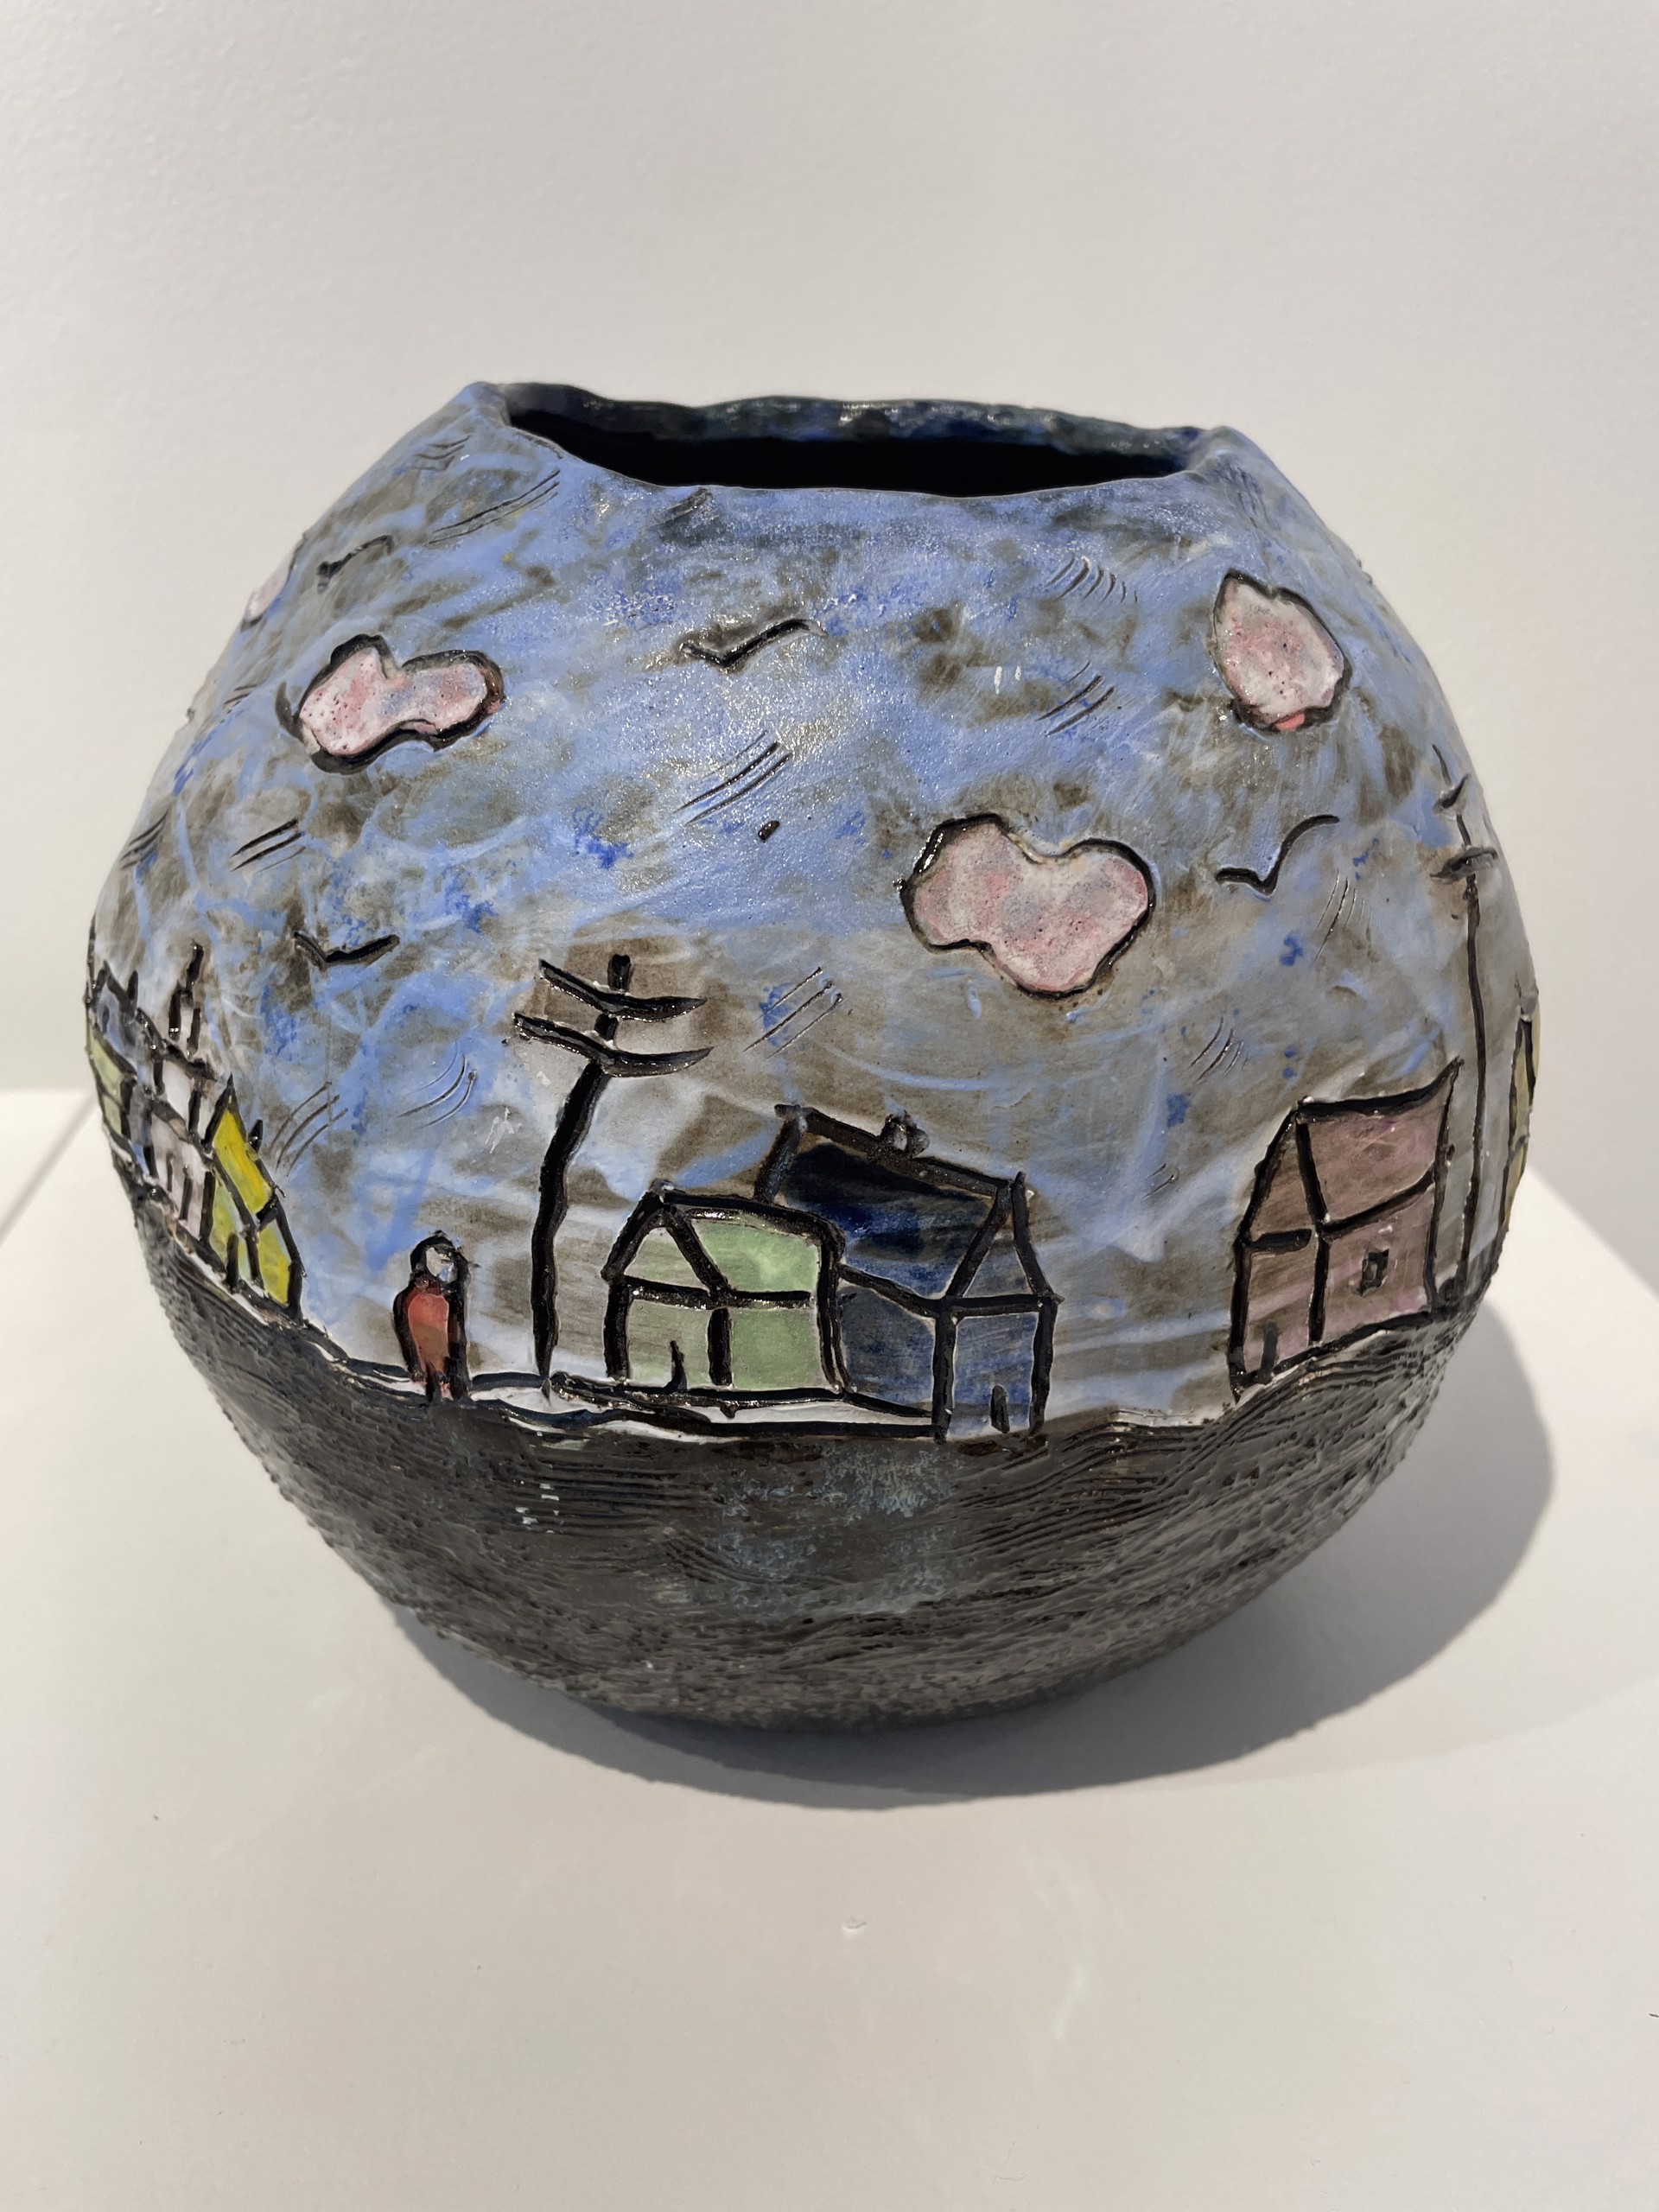 Village Series #6 Vessel by Marian Roth